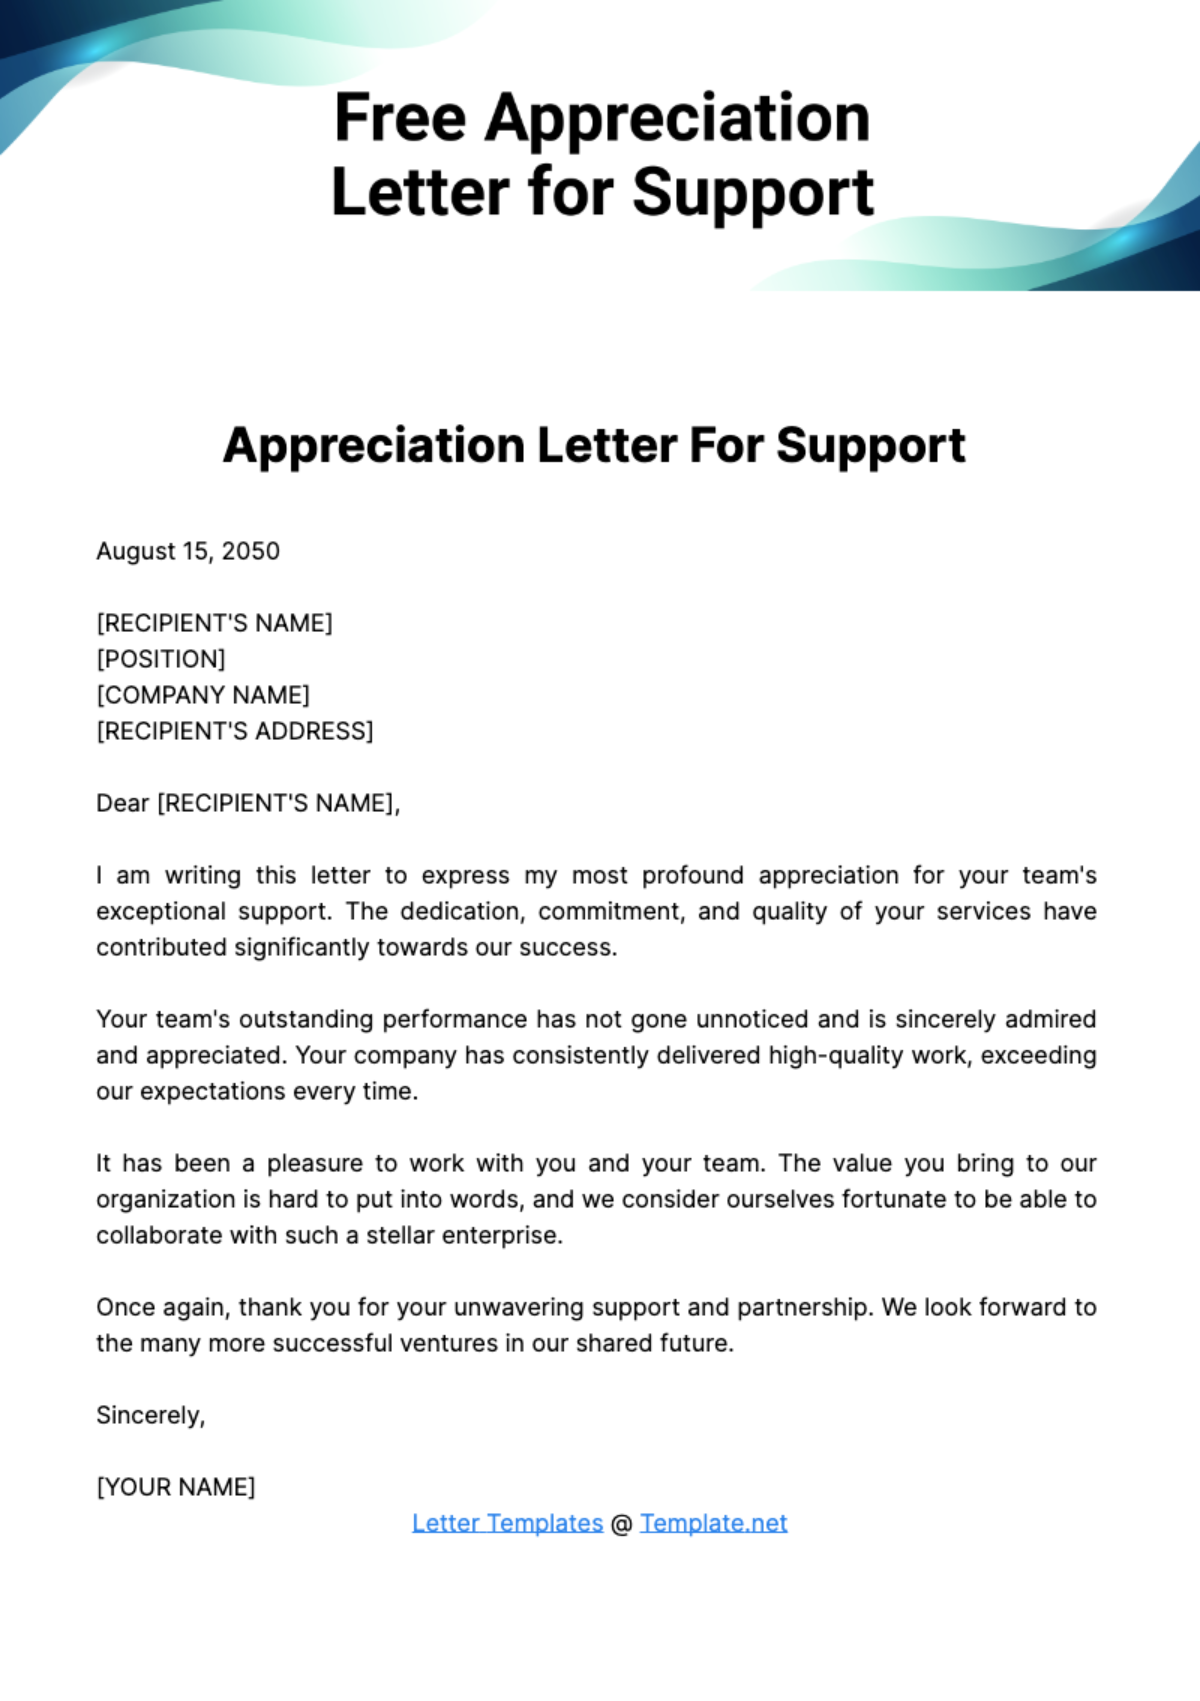 Free Appreciation Letter for Support Template